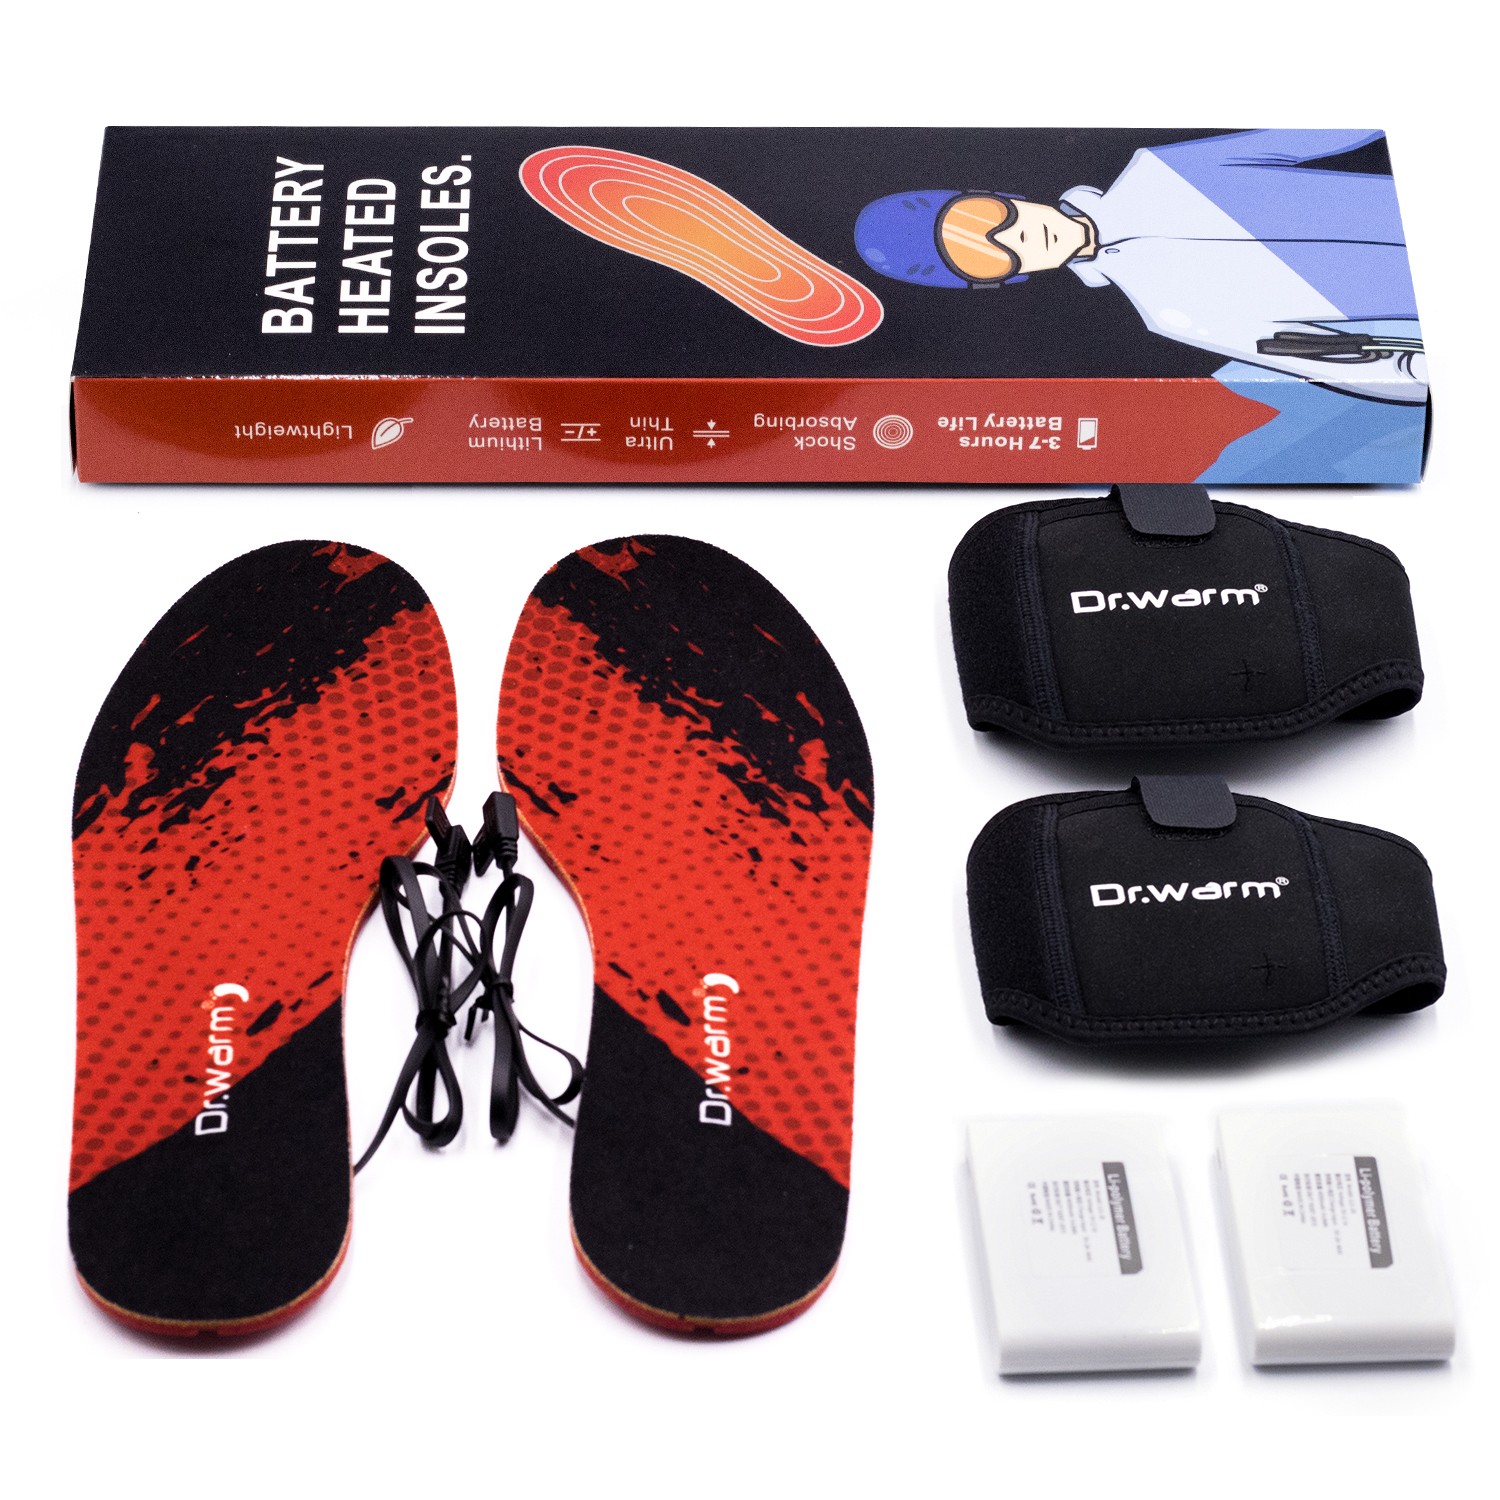 Dr. Warm battery heated insoles-22